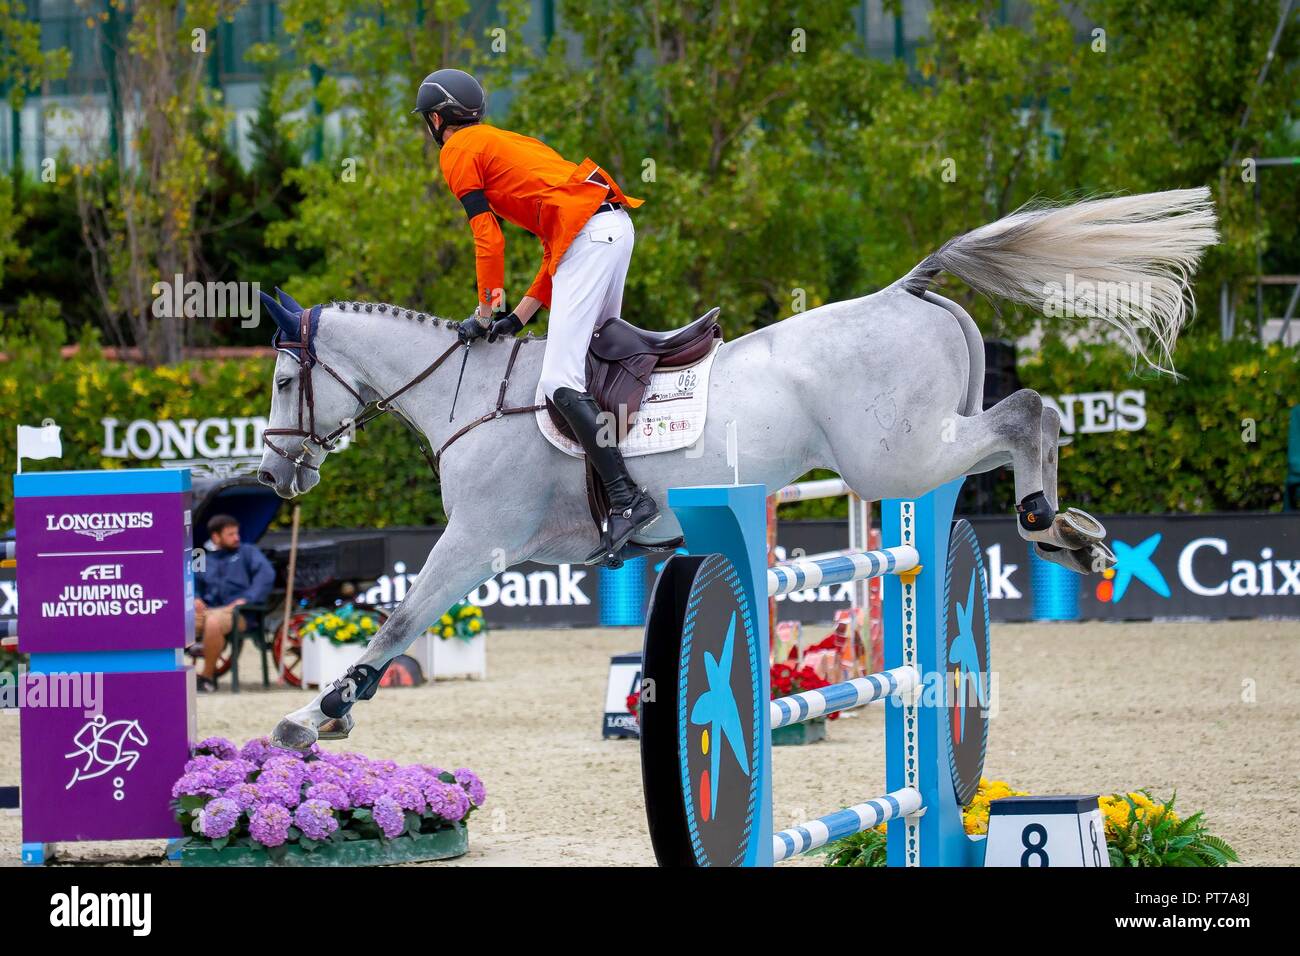 Barcellona, Spagna. Il 7 ottobre 2018. Vincitore. Frank Schuttert. NED. Equitazione Claus Dieter. Caixa Bank Trophy. Longines FEI Jumping Nations Cup finale. Showjumping. Barcellona. Spagna. Il giorno 3. 07/10/2018. Foto Stock